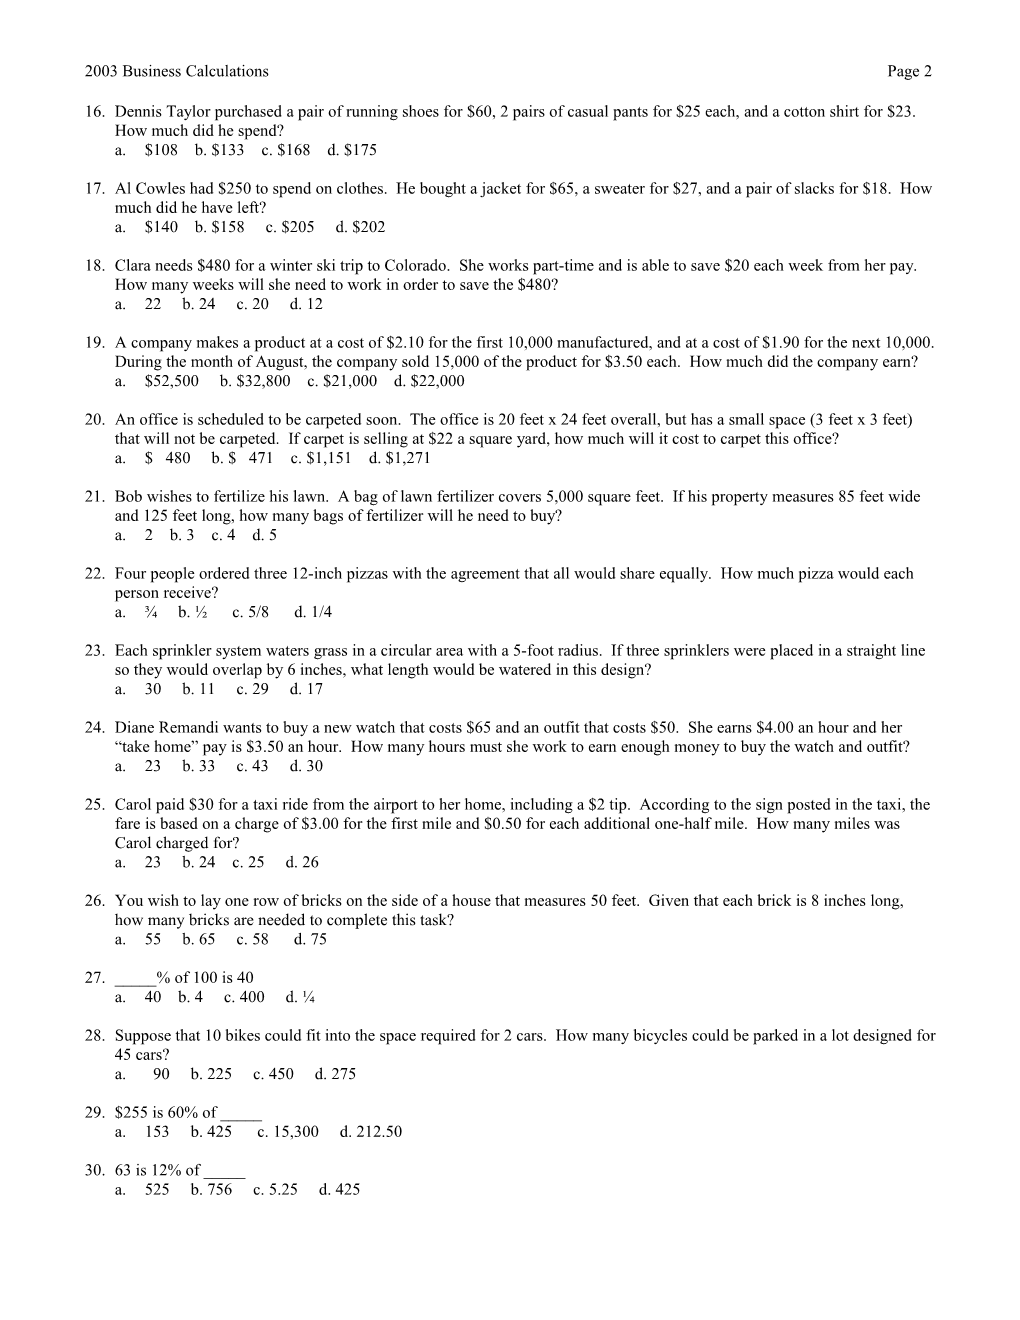 2003 Business Calculations Page 1